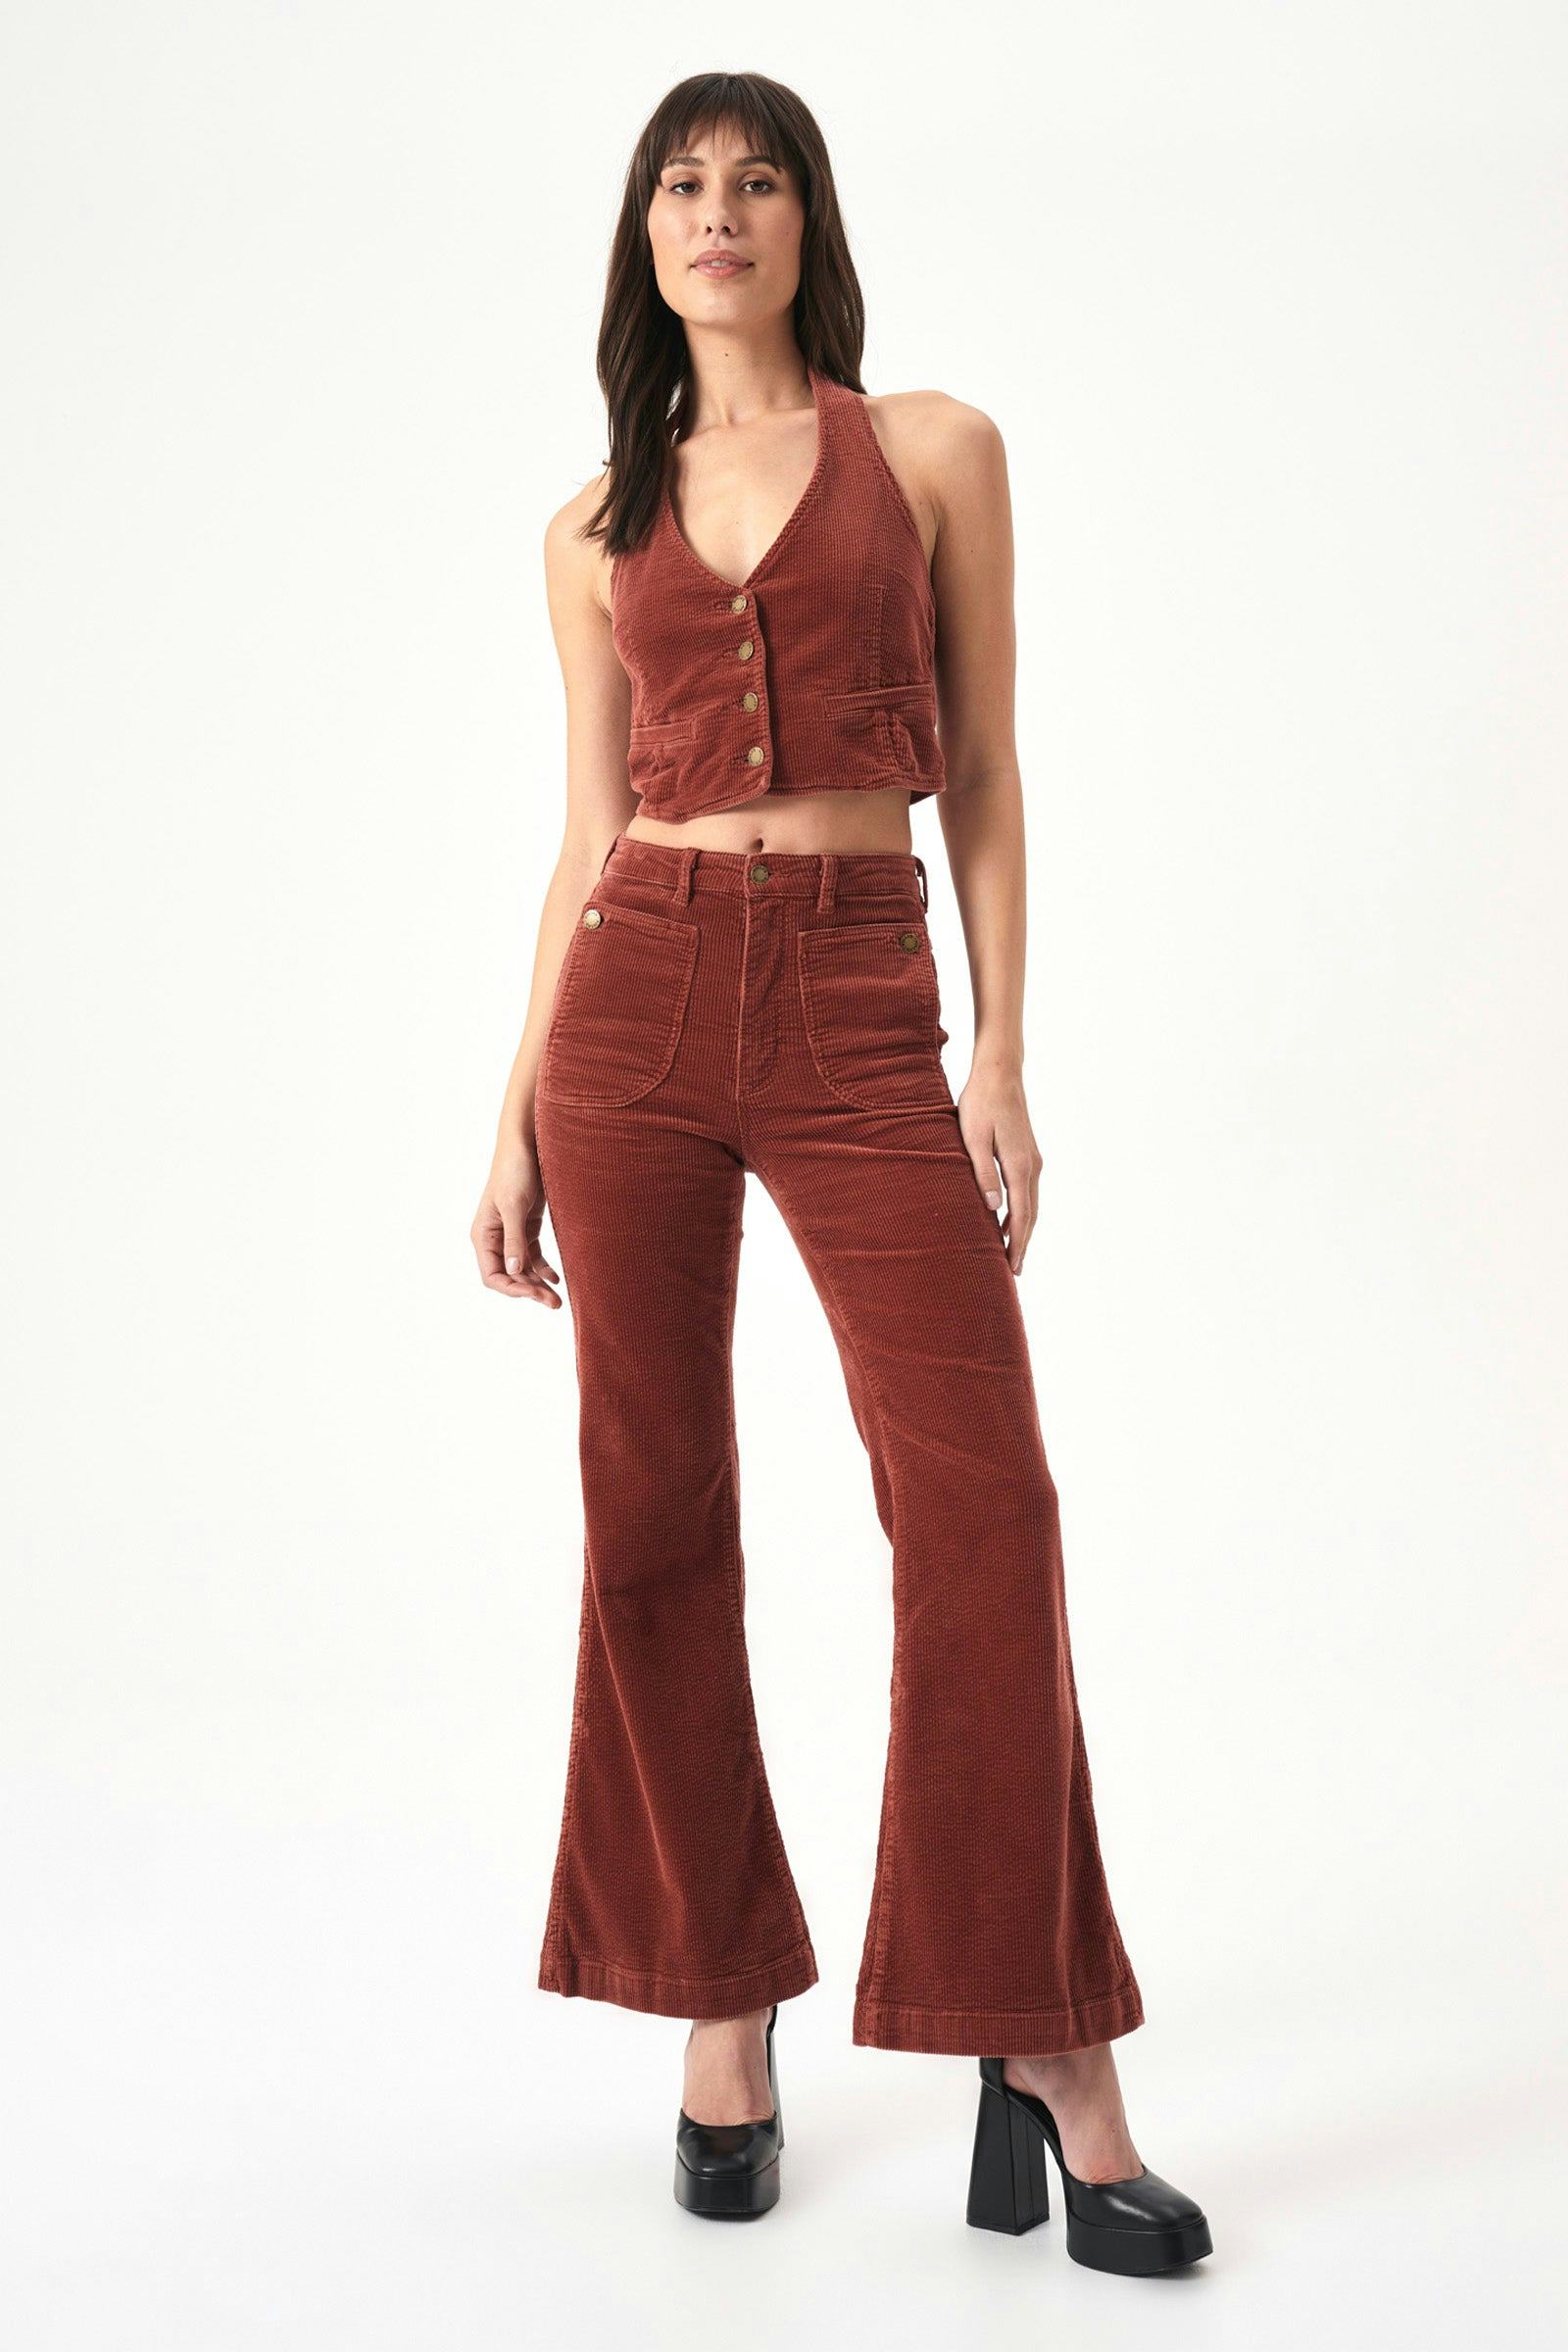 Eastcoast Flare Cord Jeans Pomegranate Red